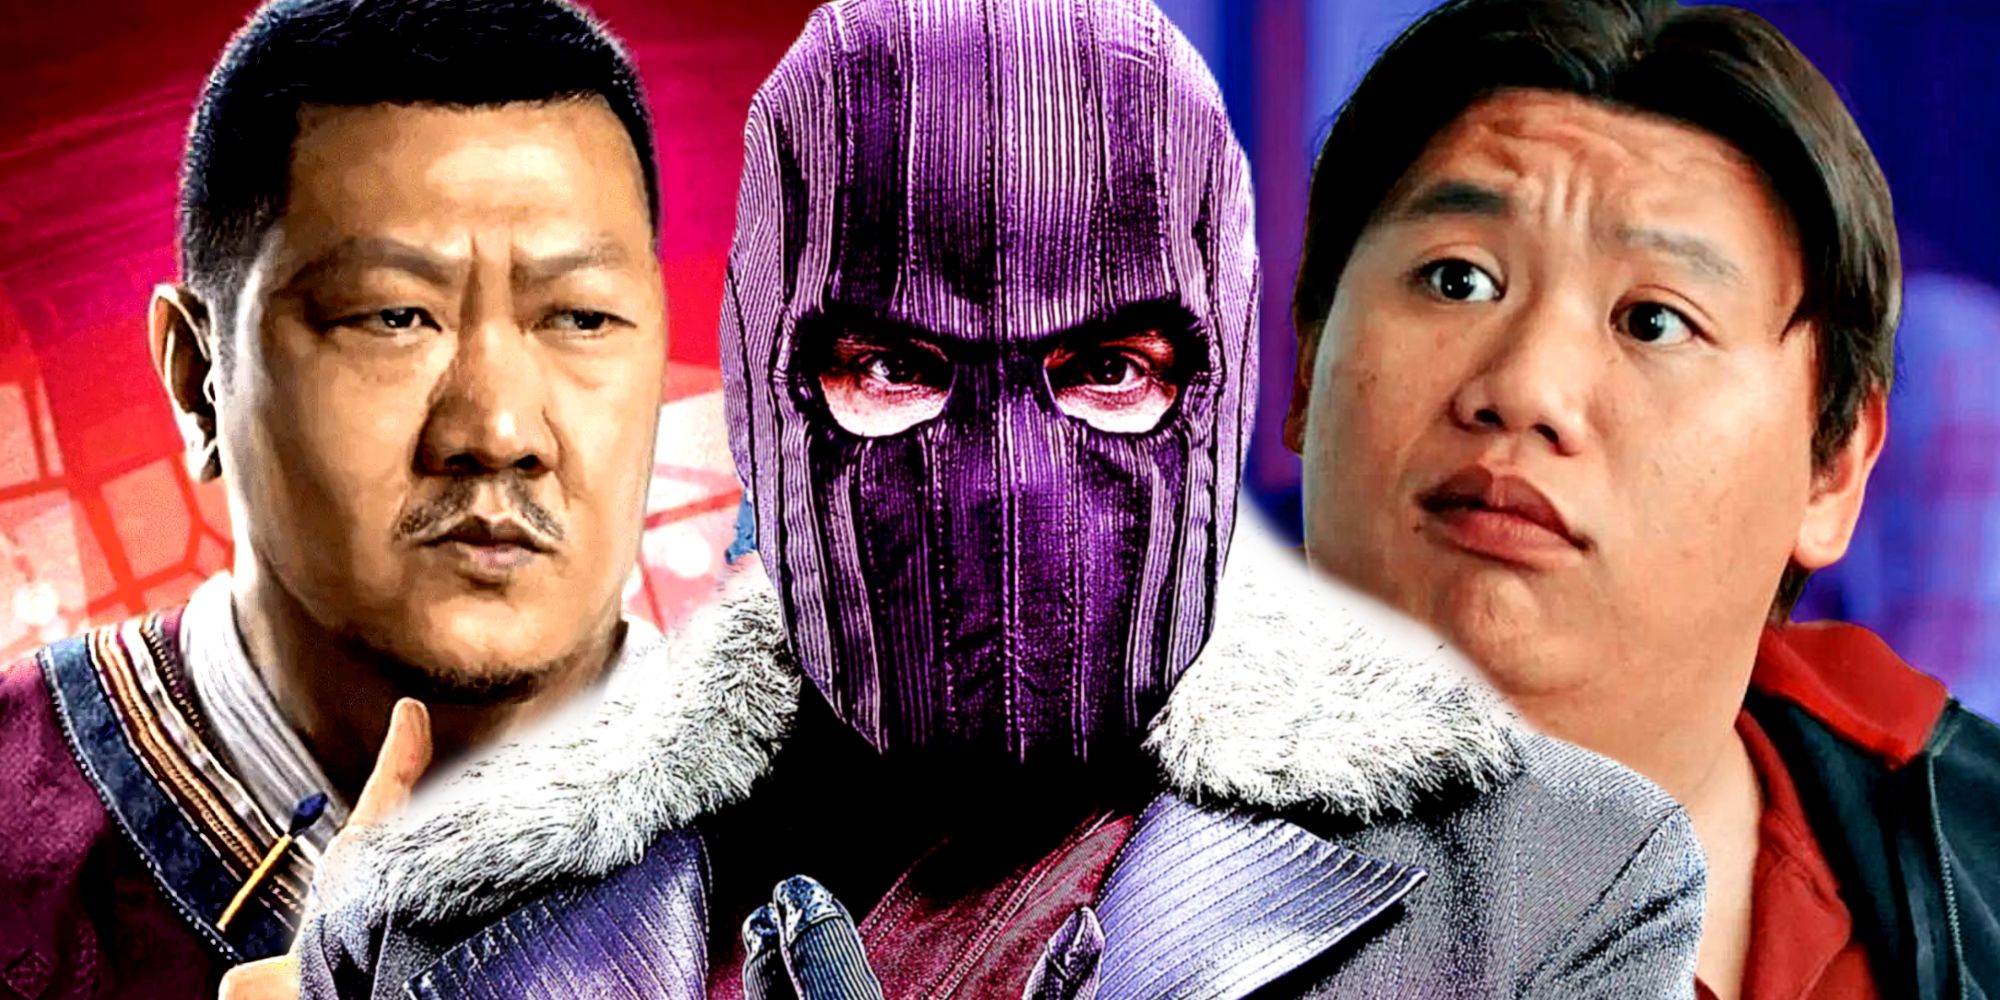 Baron Zemo, Wong, and Ned Leeds in the MCU